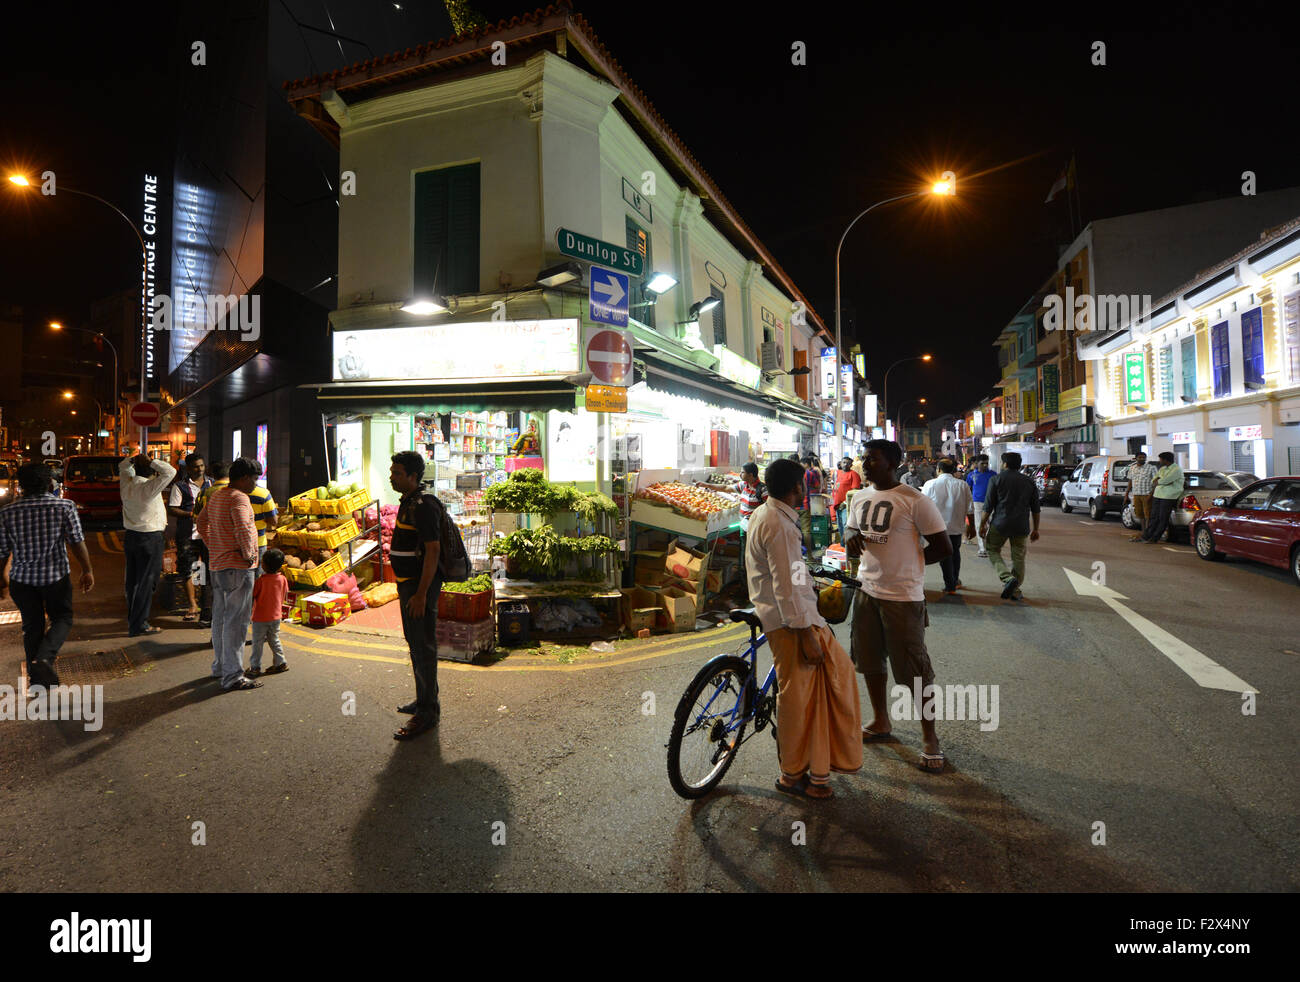 Indian heritage centre and vegetable shops near it. Stock Photo